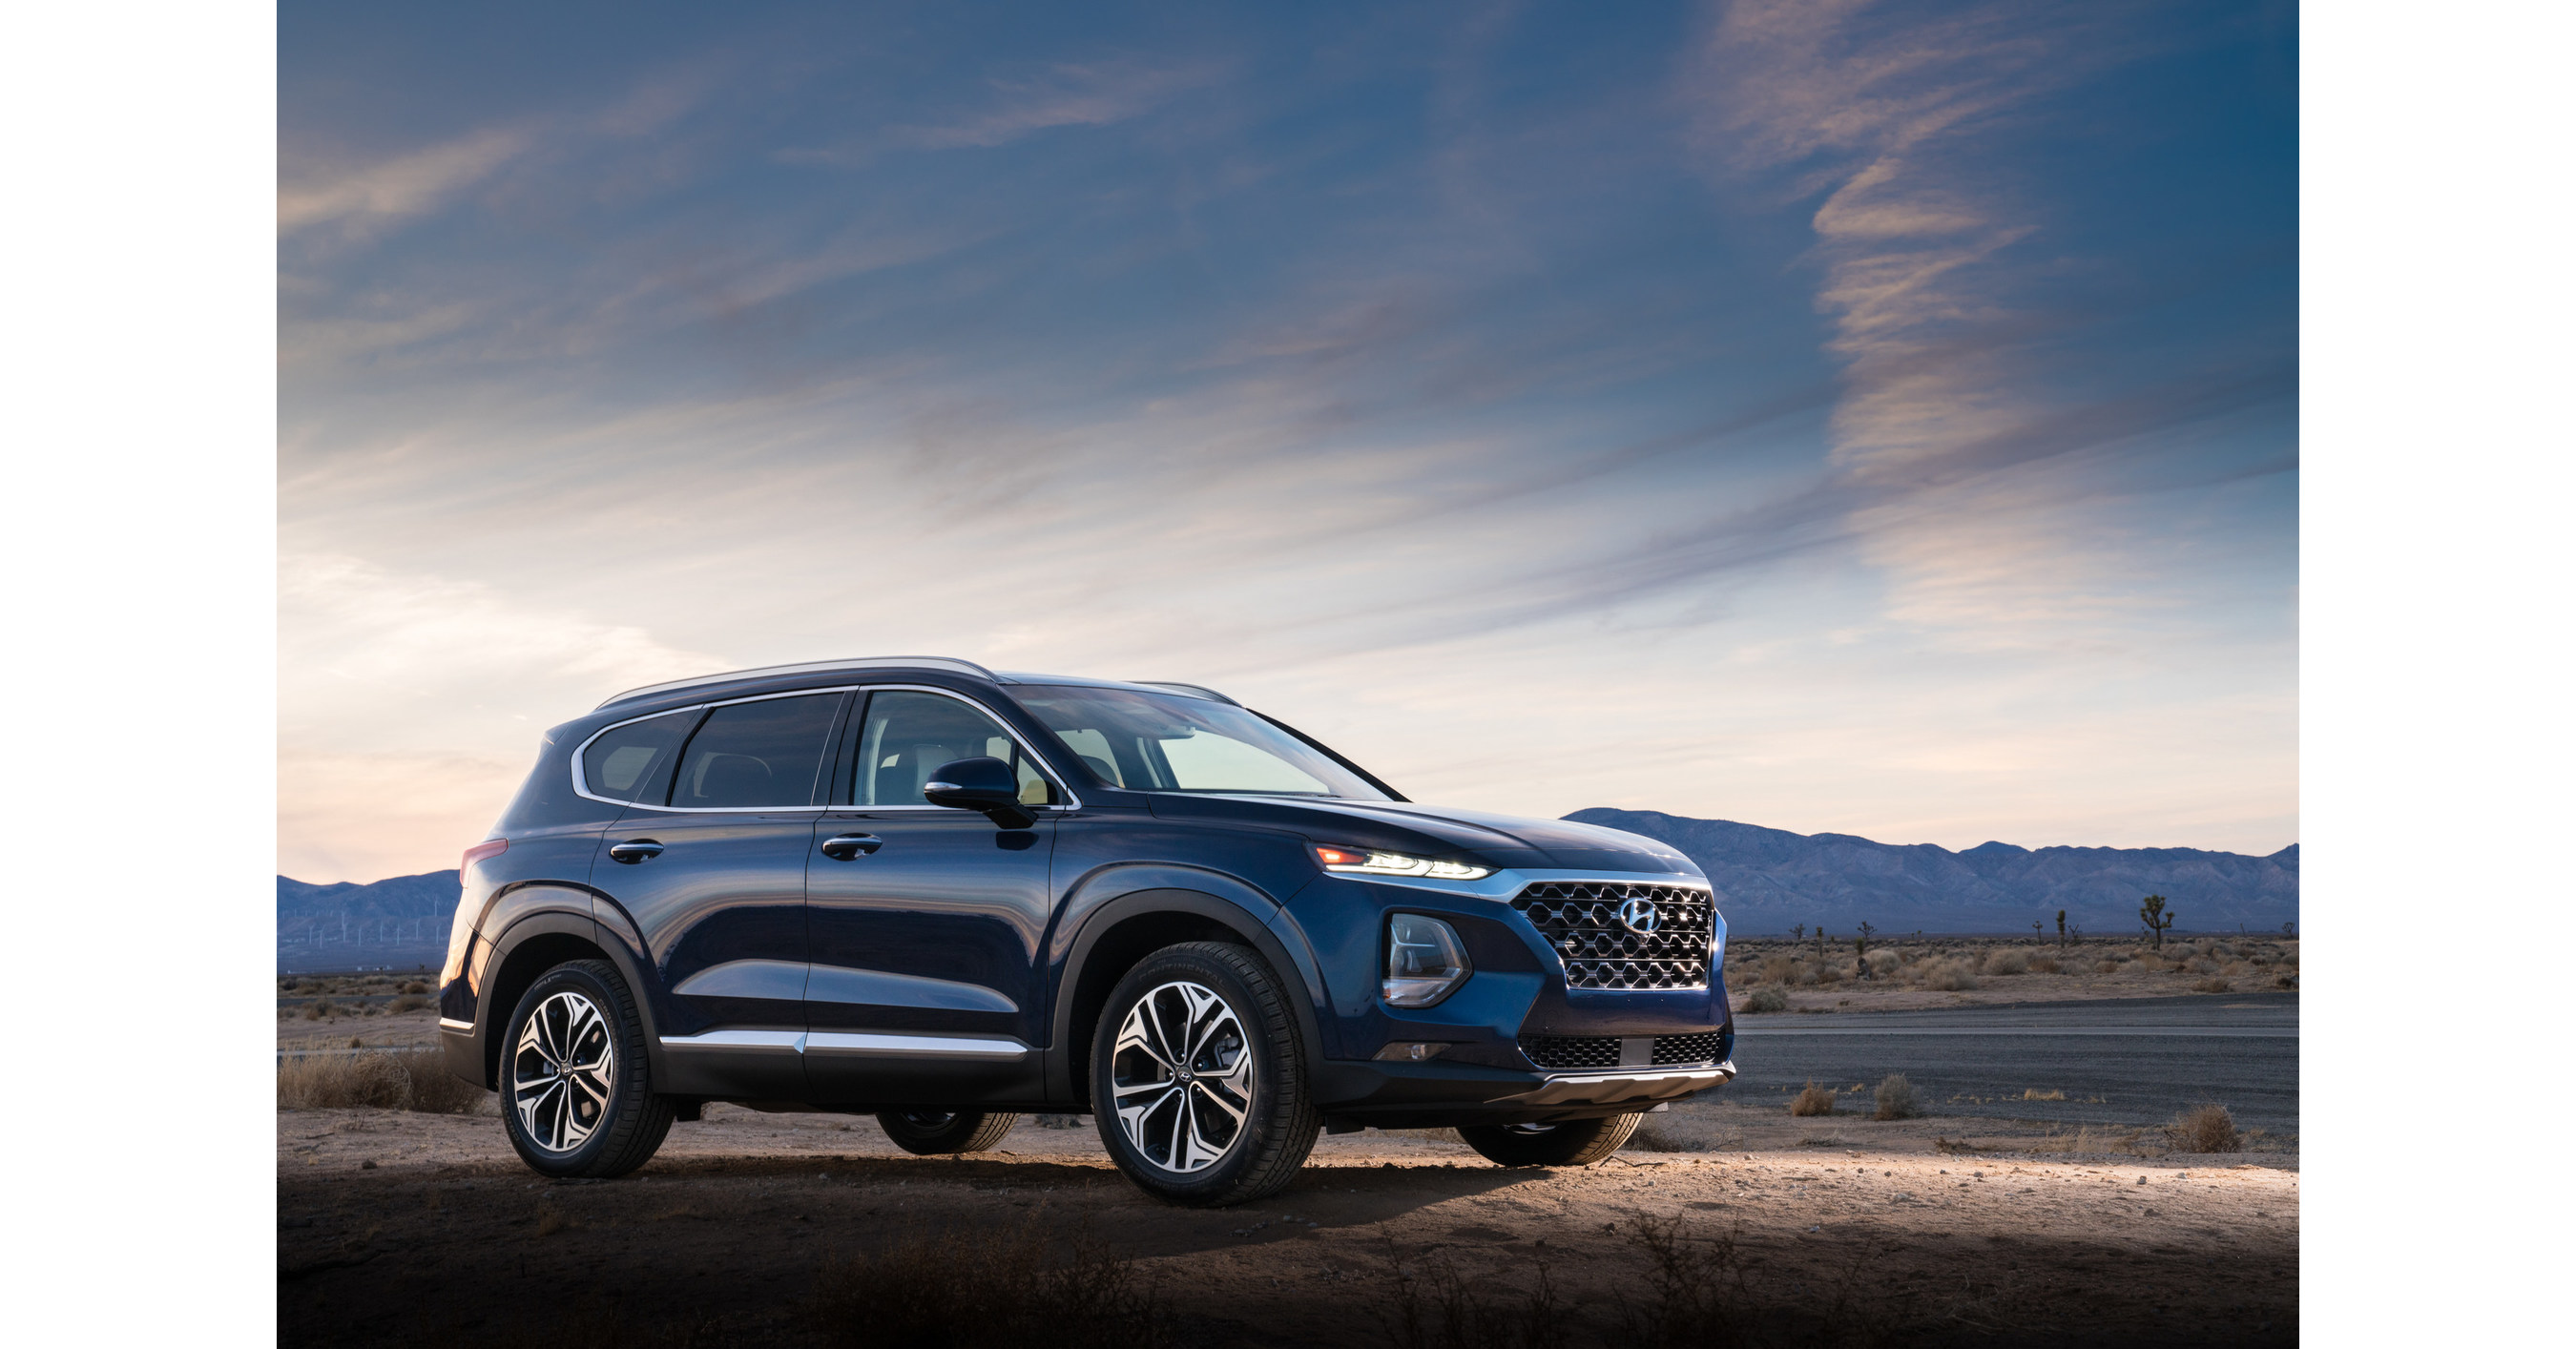 The All-New 2019 Santa Fe Makes its United States Debut at the New York